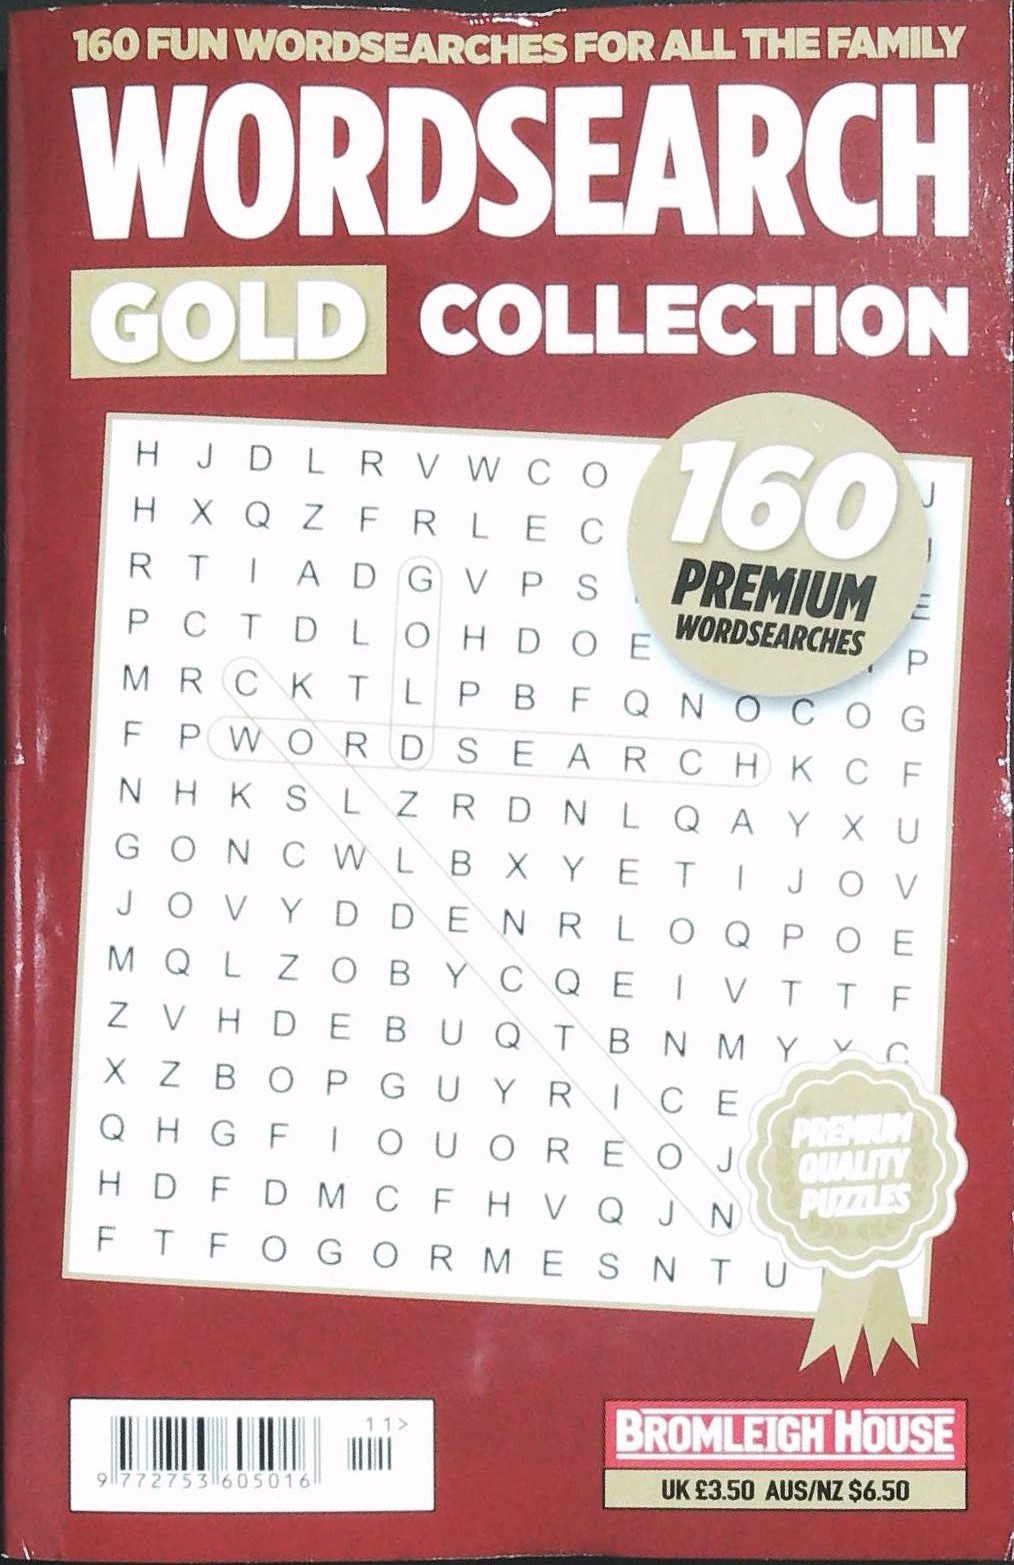 WORDSEARCH GOLD COLLECTION